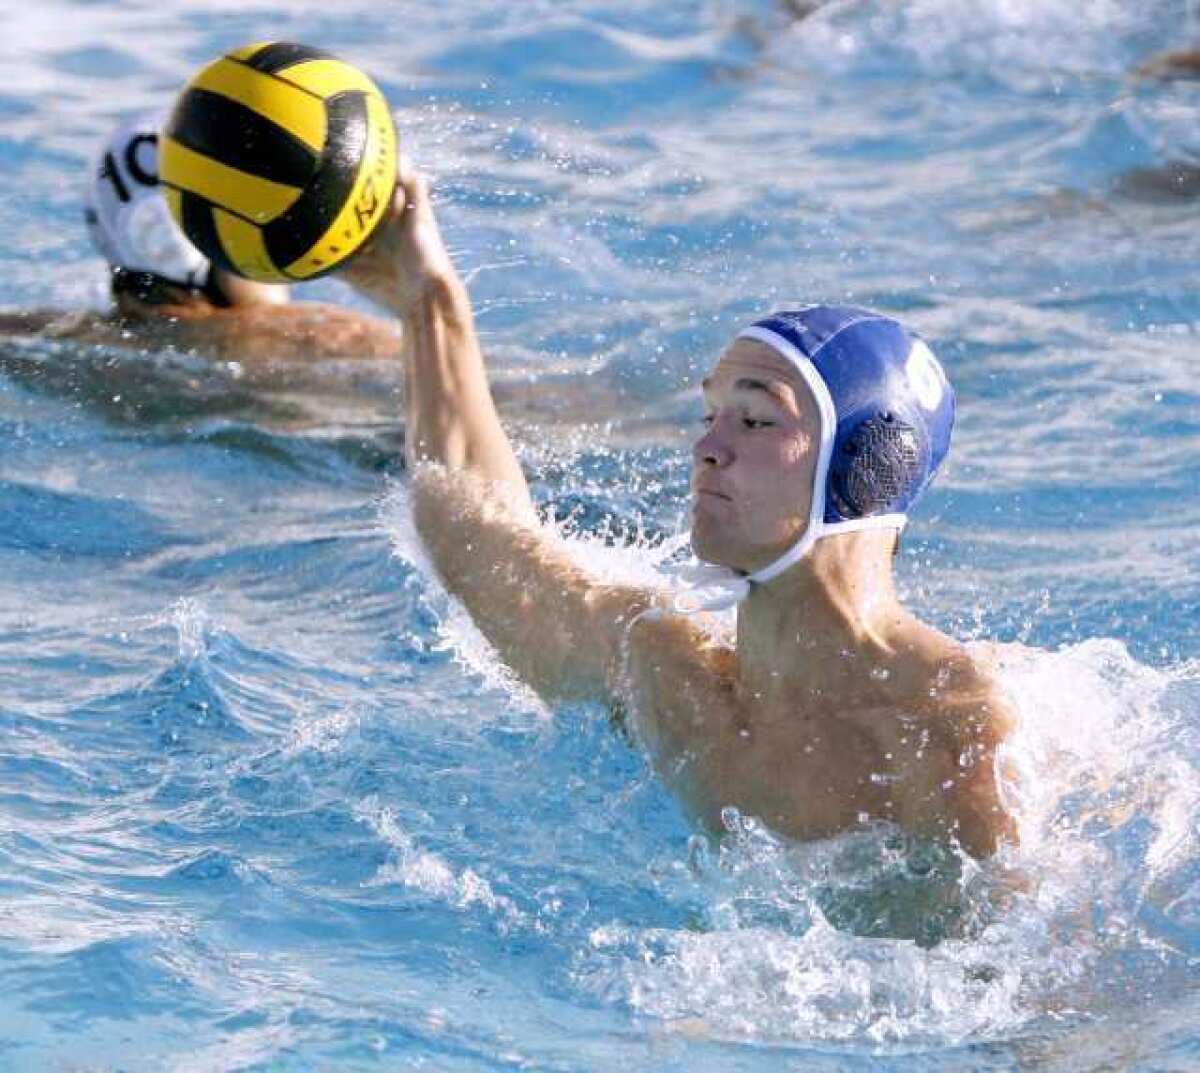 ARCHIVE PHOTO: Ethan Vandeventer tallied 64 goals, 37 assists and 58 steals for Flintridge Prep this season.